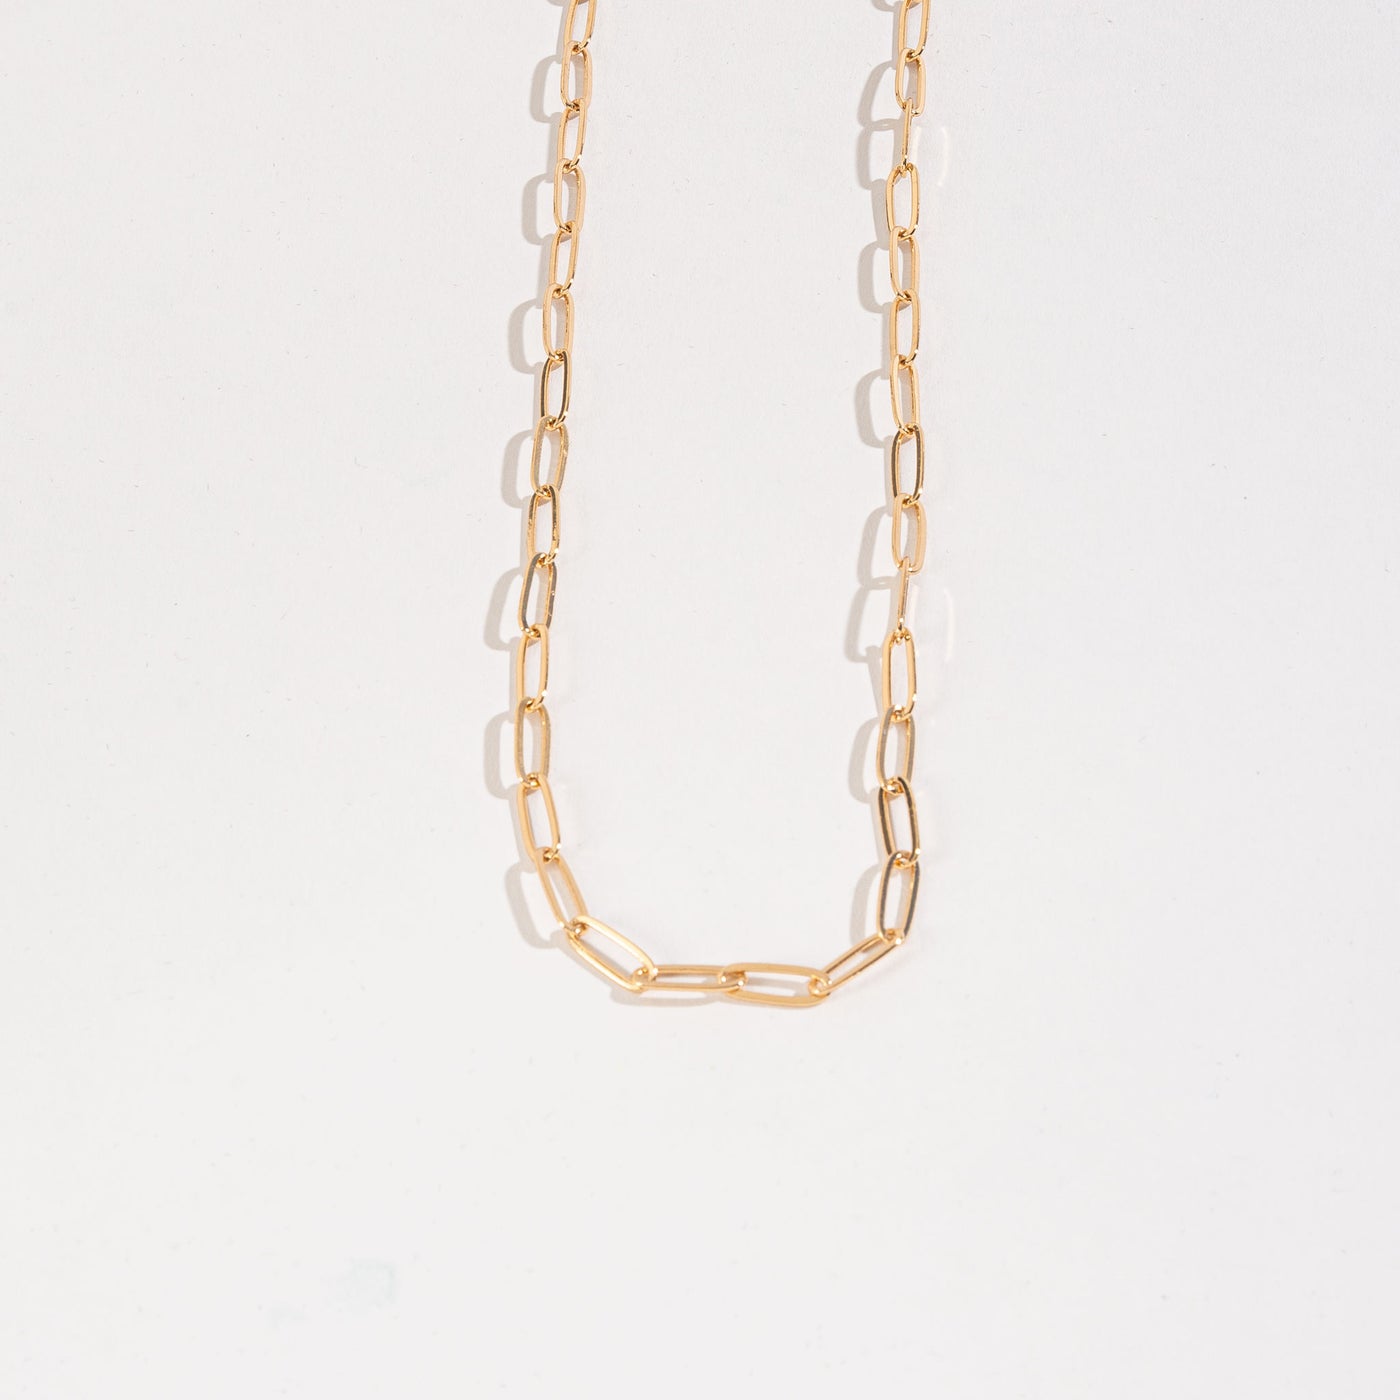 gold paperclip chain necklace.